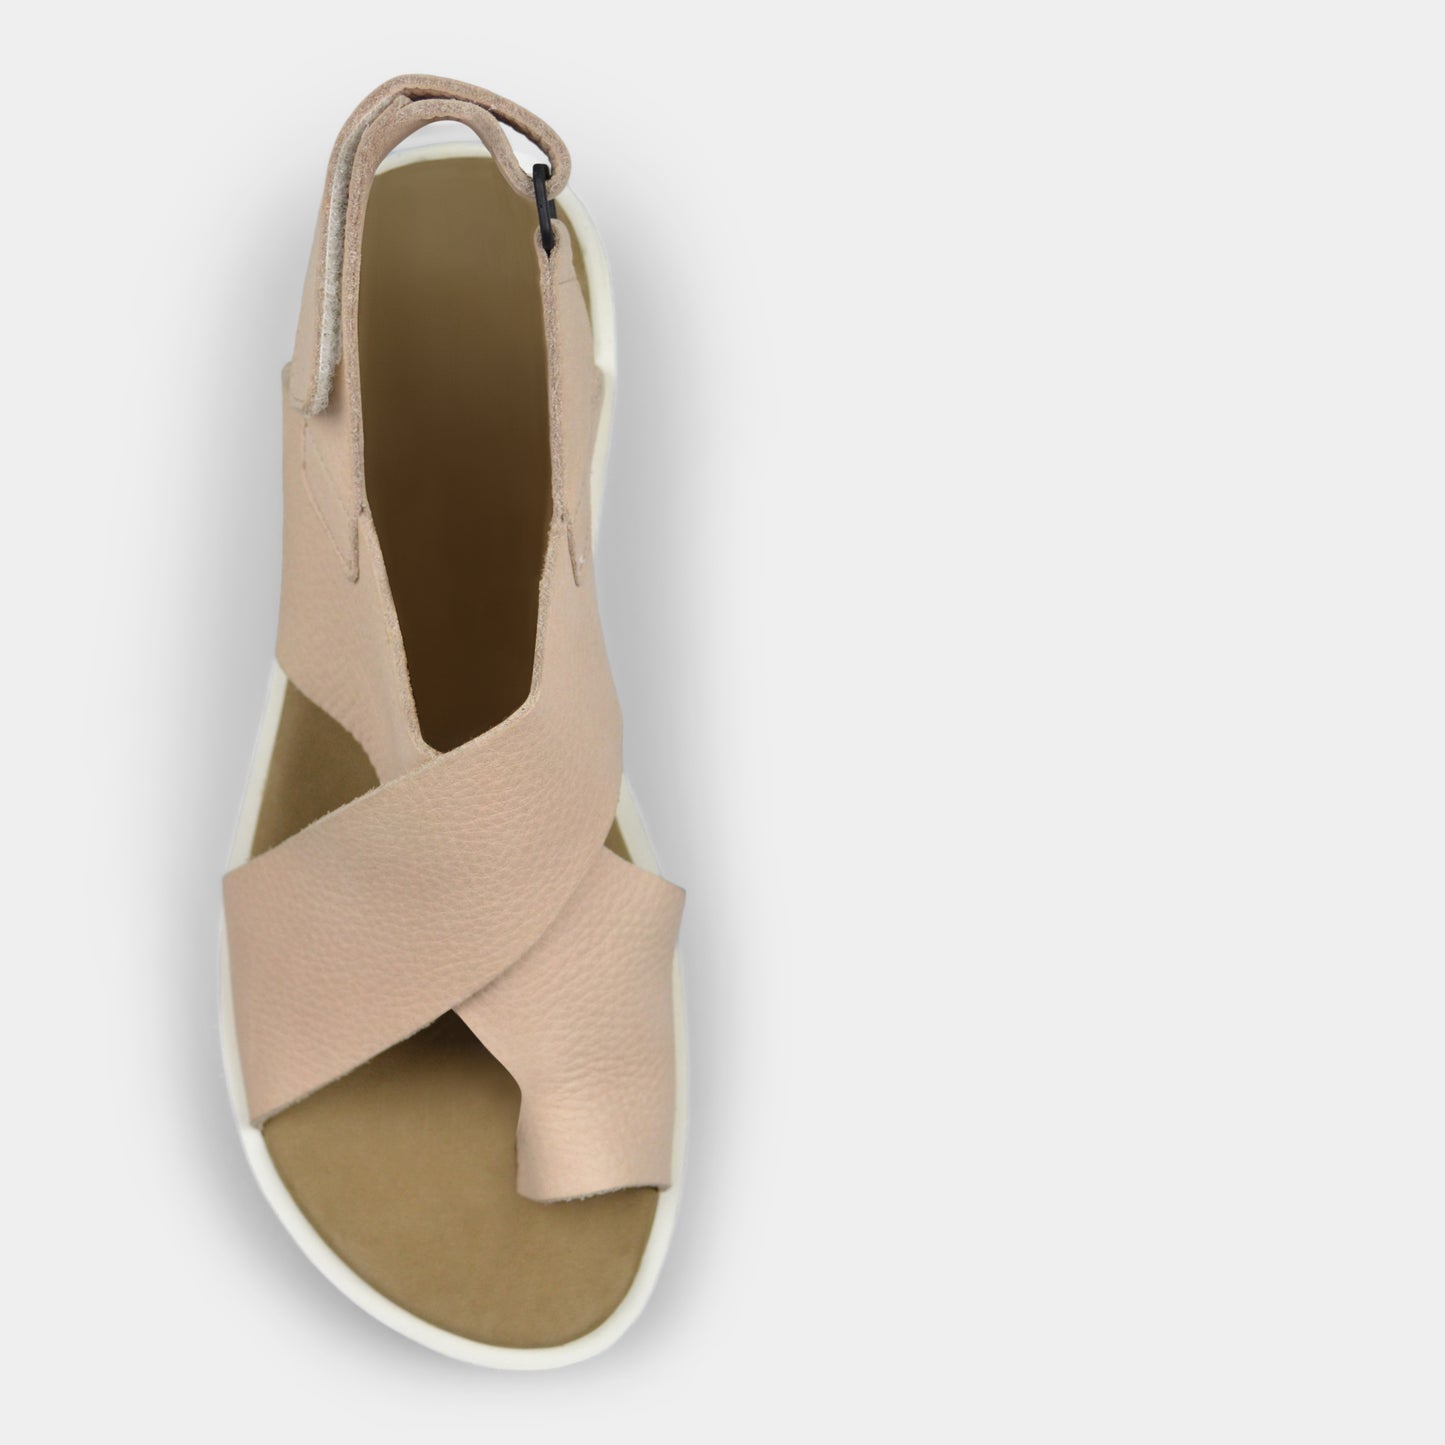 ARCHE IKAM SANDAL IN NUDE